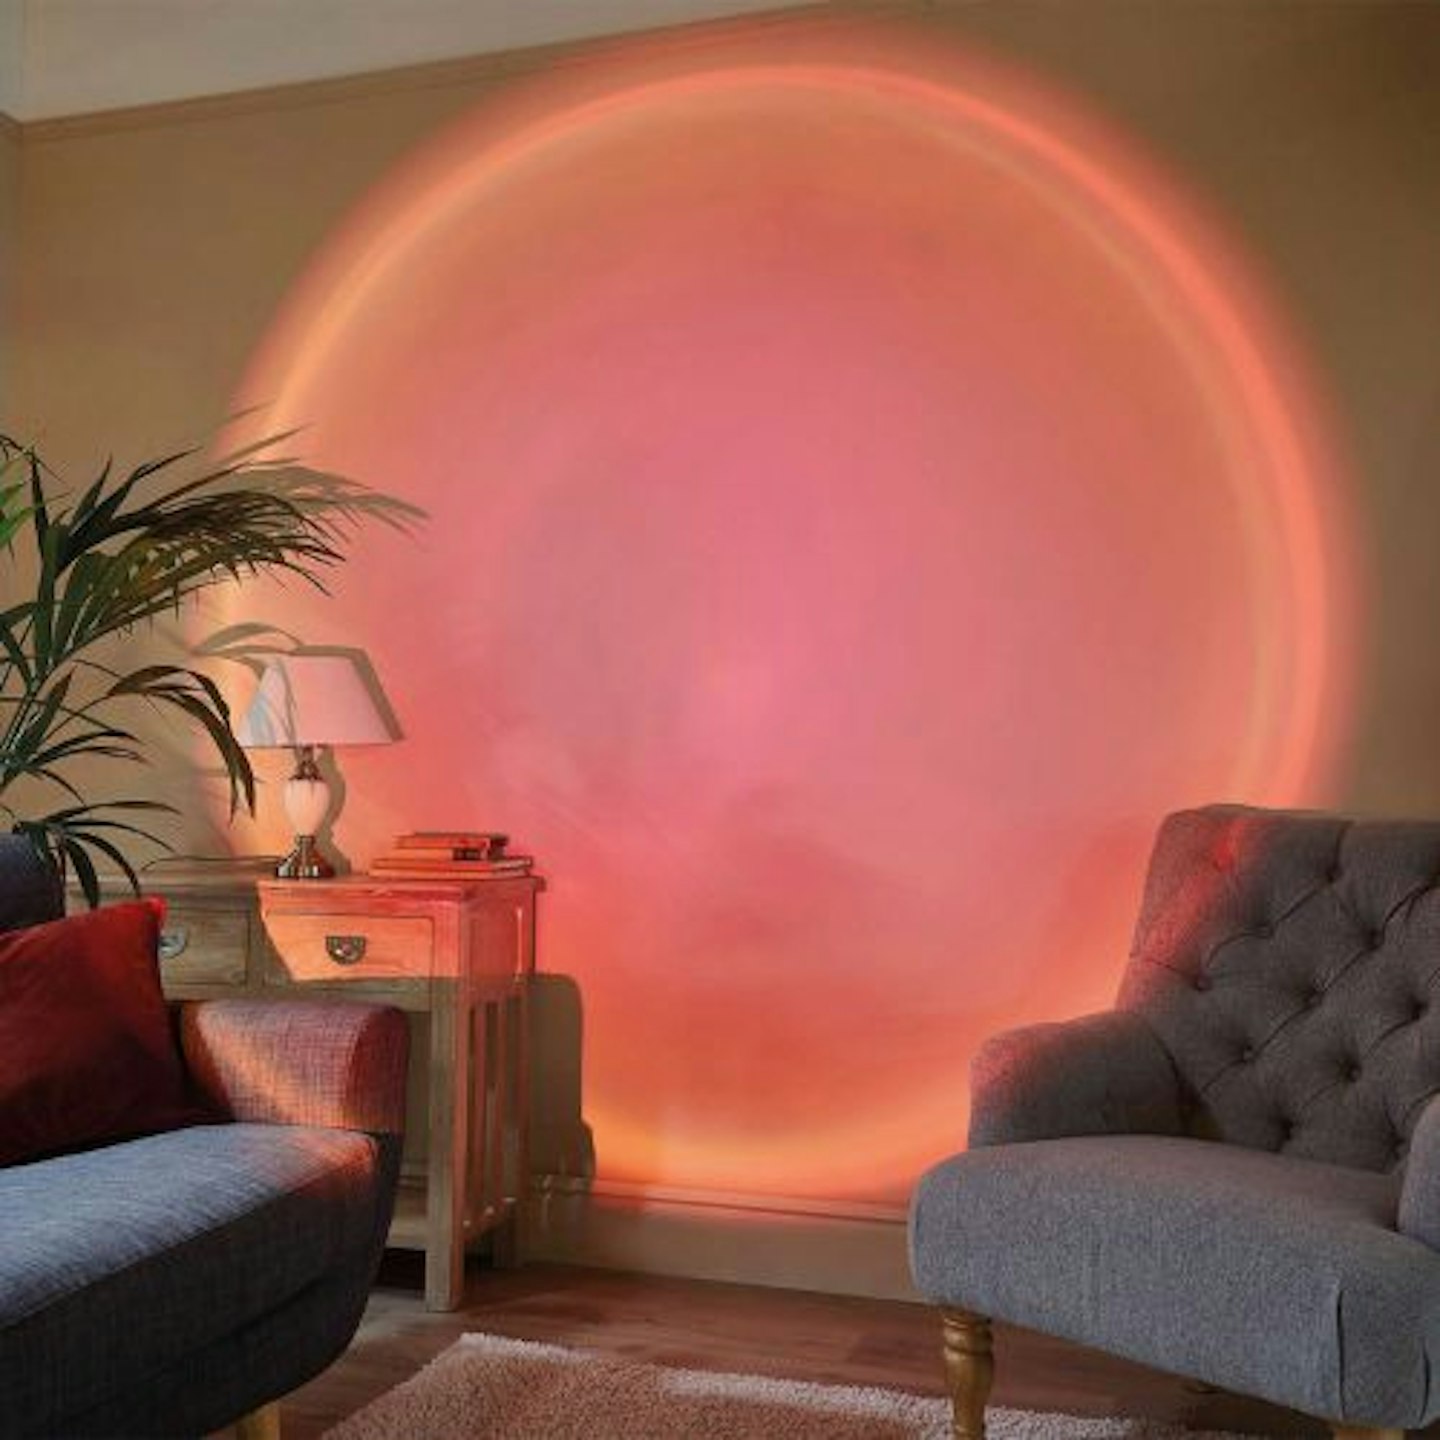 Sunset Projector Light with Remote Control